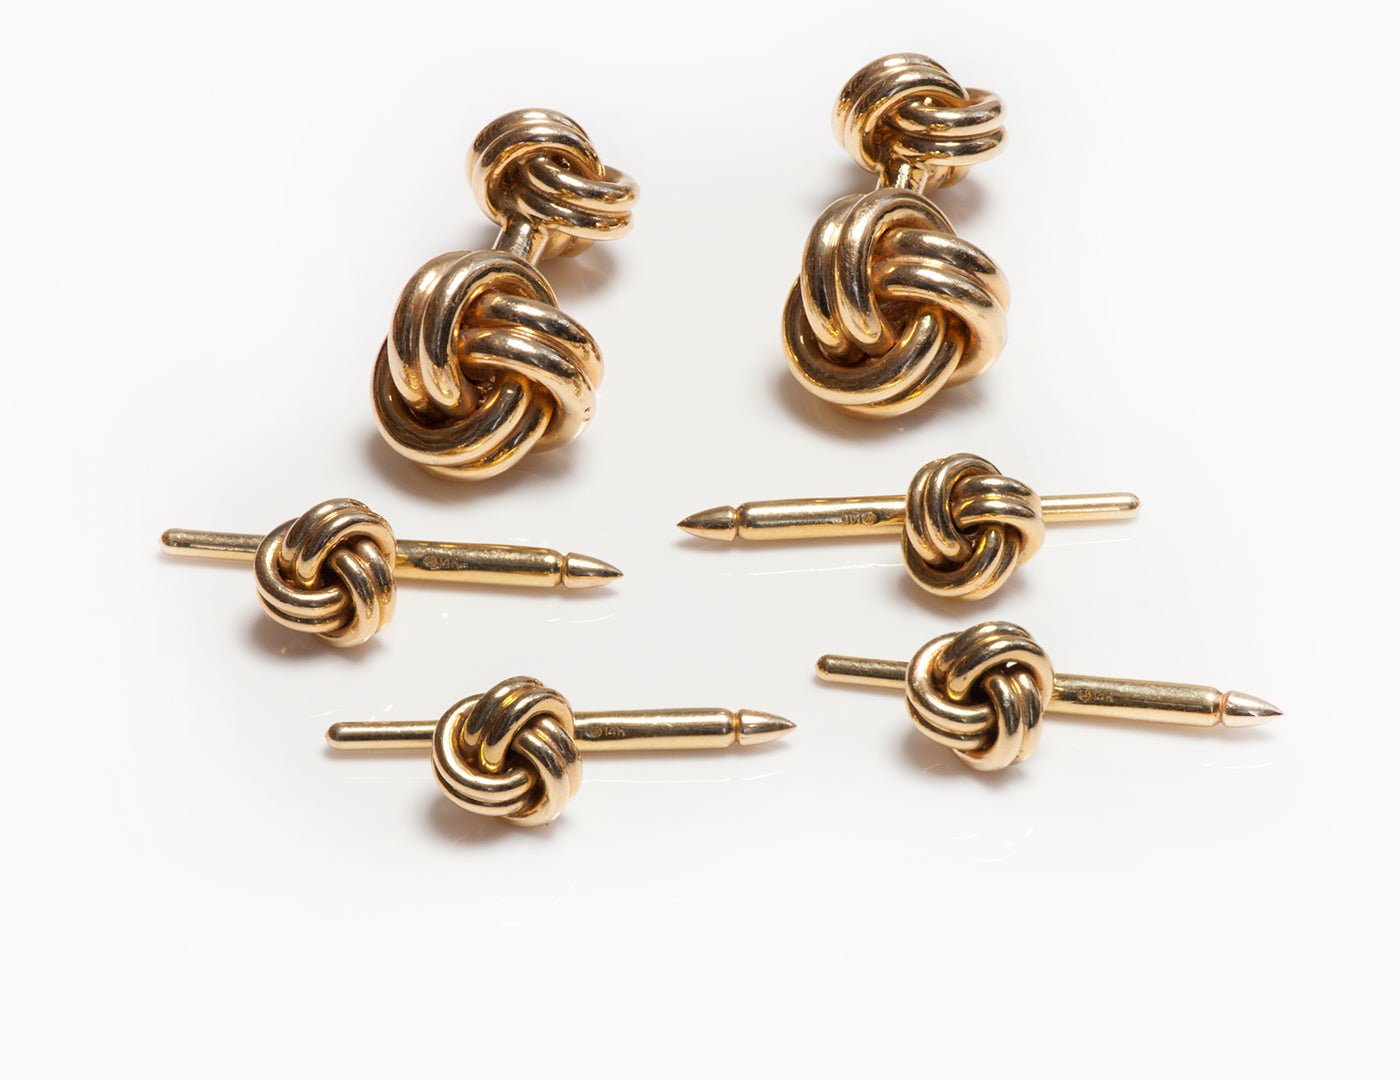 Vintage Tiffany & Co. Gold Knot Cufflink with 4 Stud Set